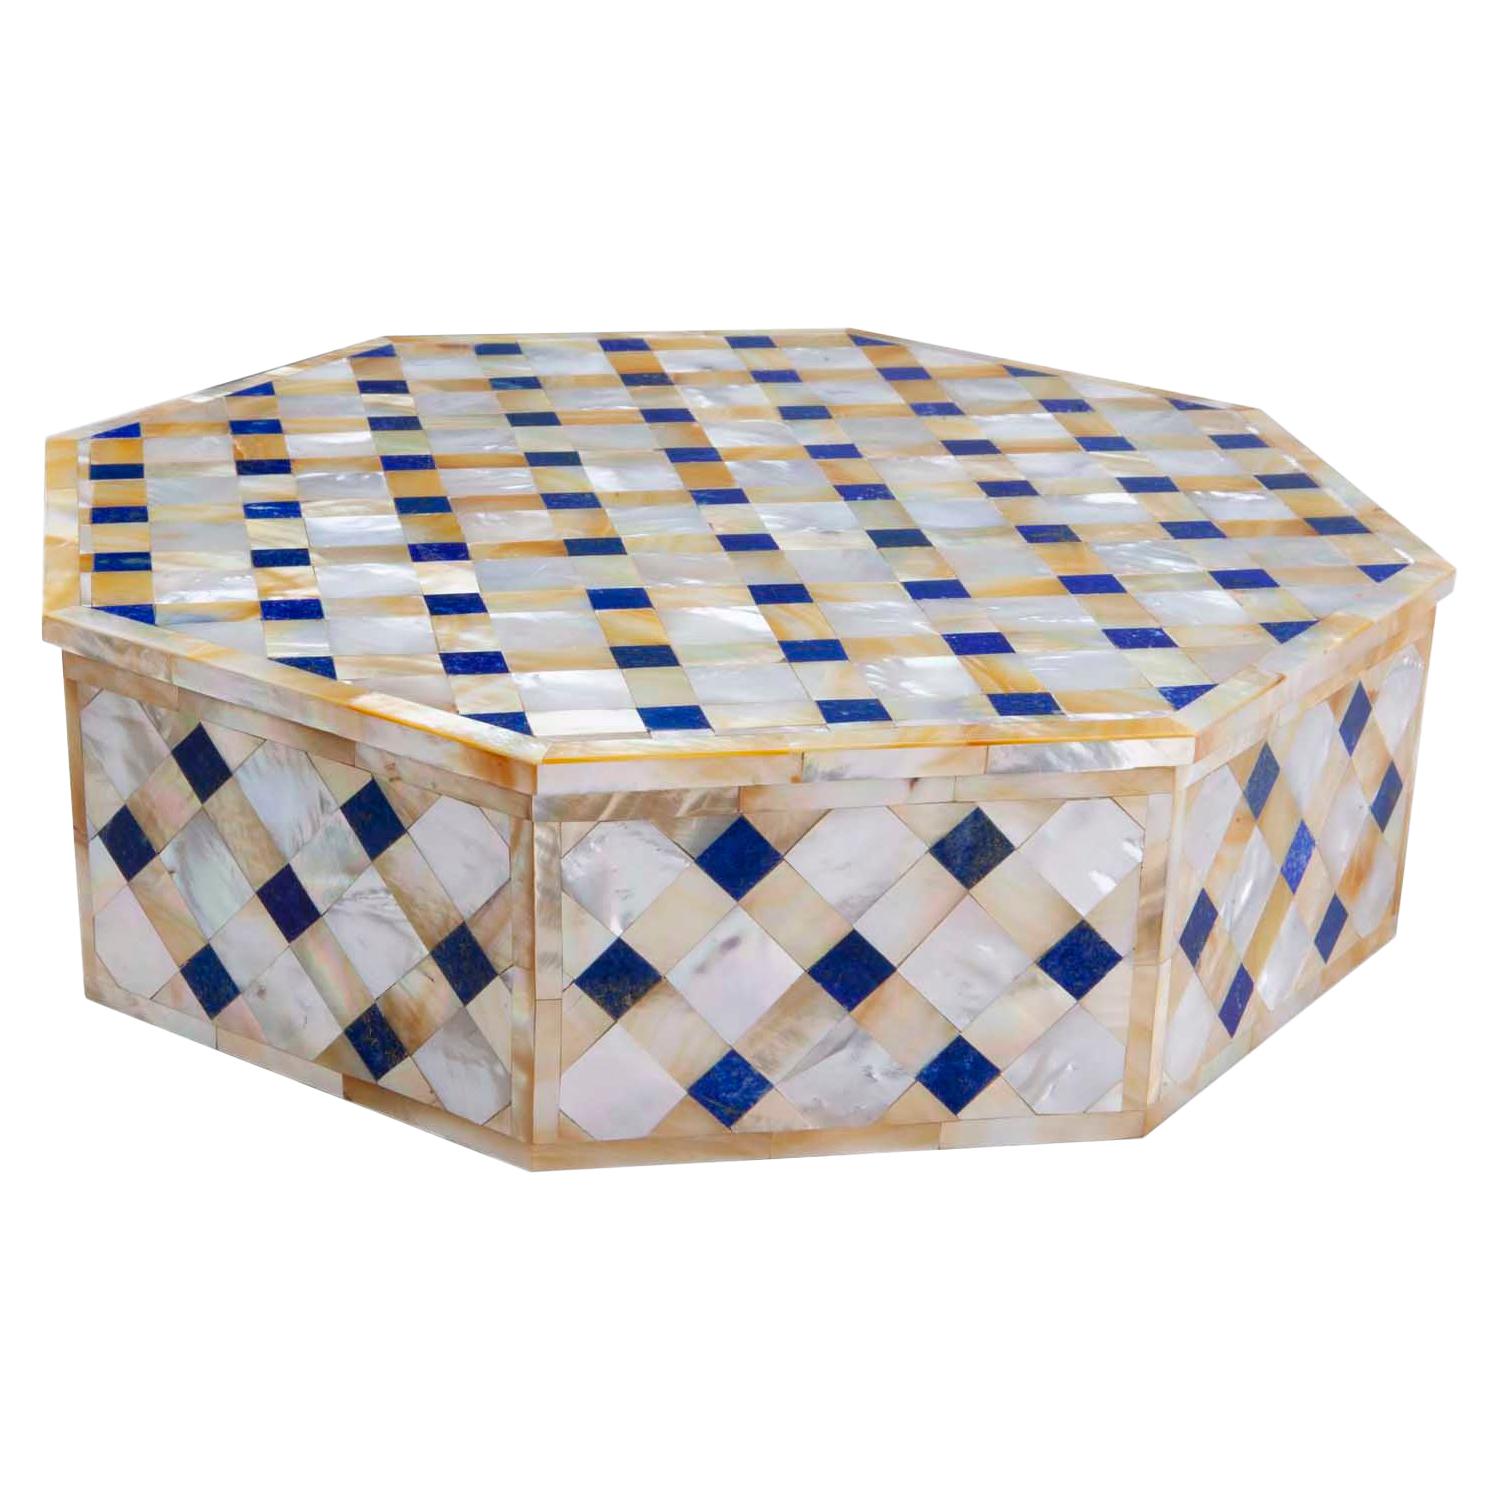 Makrana Marble Box from Agra India Inlaid with Lapis and Abablone For Sale